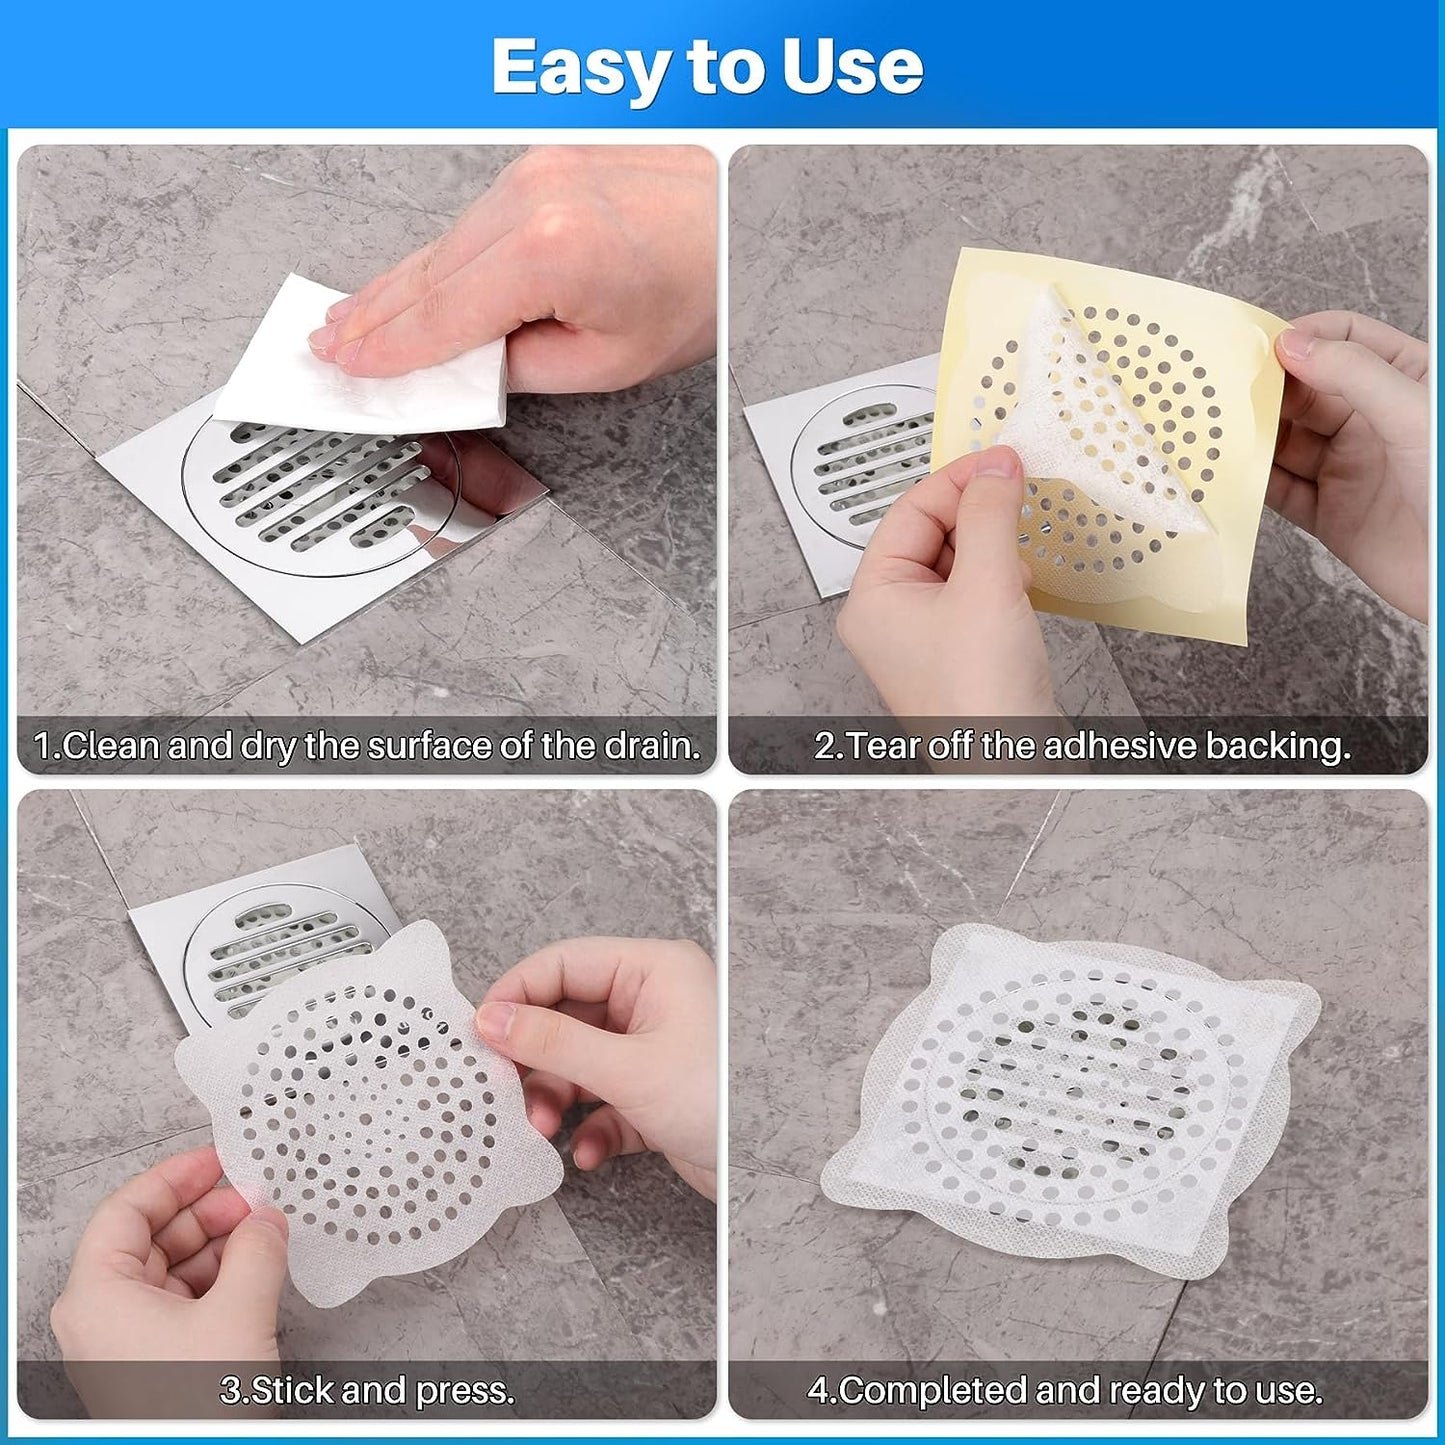 Antimbee (50 Pack, 4.1 inch Diameter) Disposable Drain Catcher, Strong Adhesion Non-Woven Shower Drain Hair Cover Strainer for Bathroom Kitchen Sink